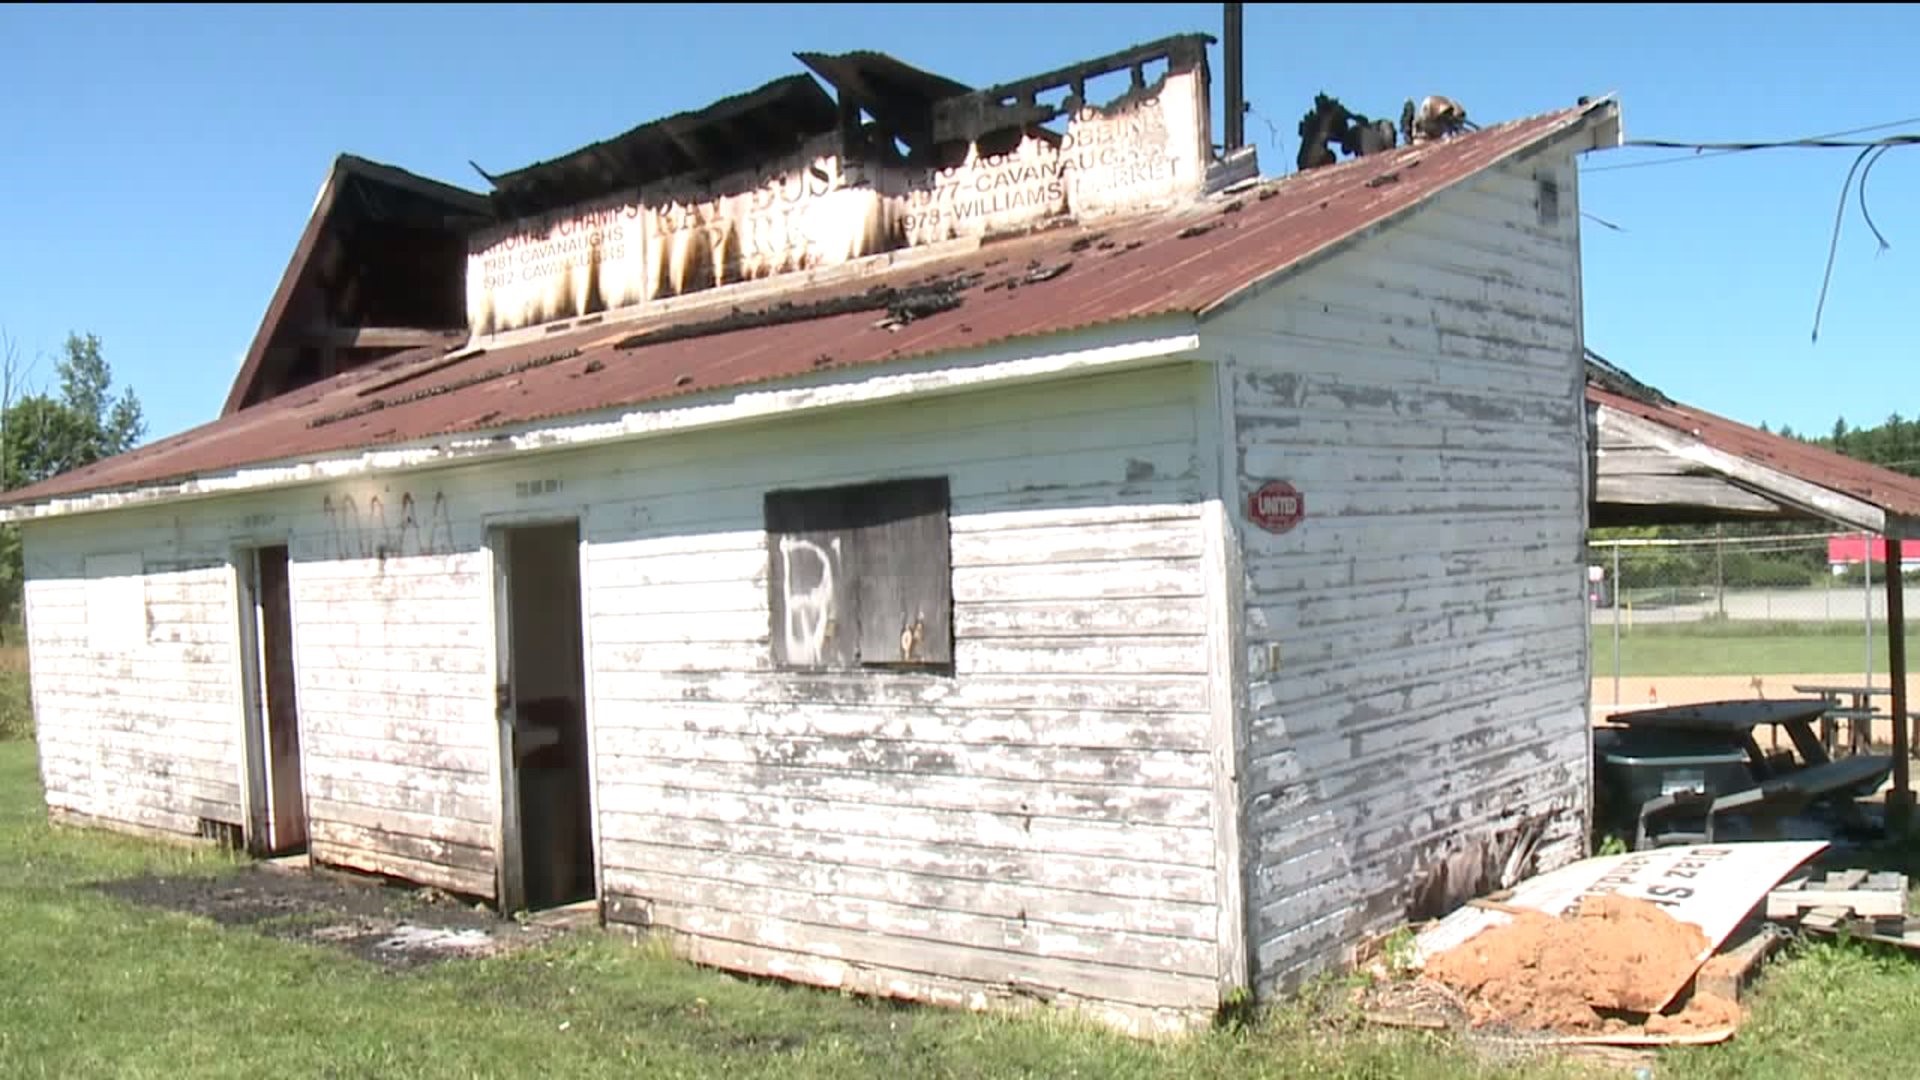 Ballpark Concession Stand Burns in Susquehanna County